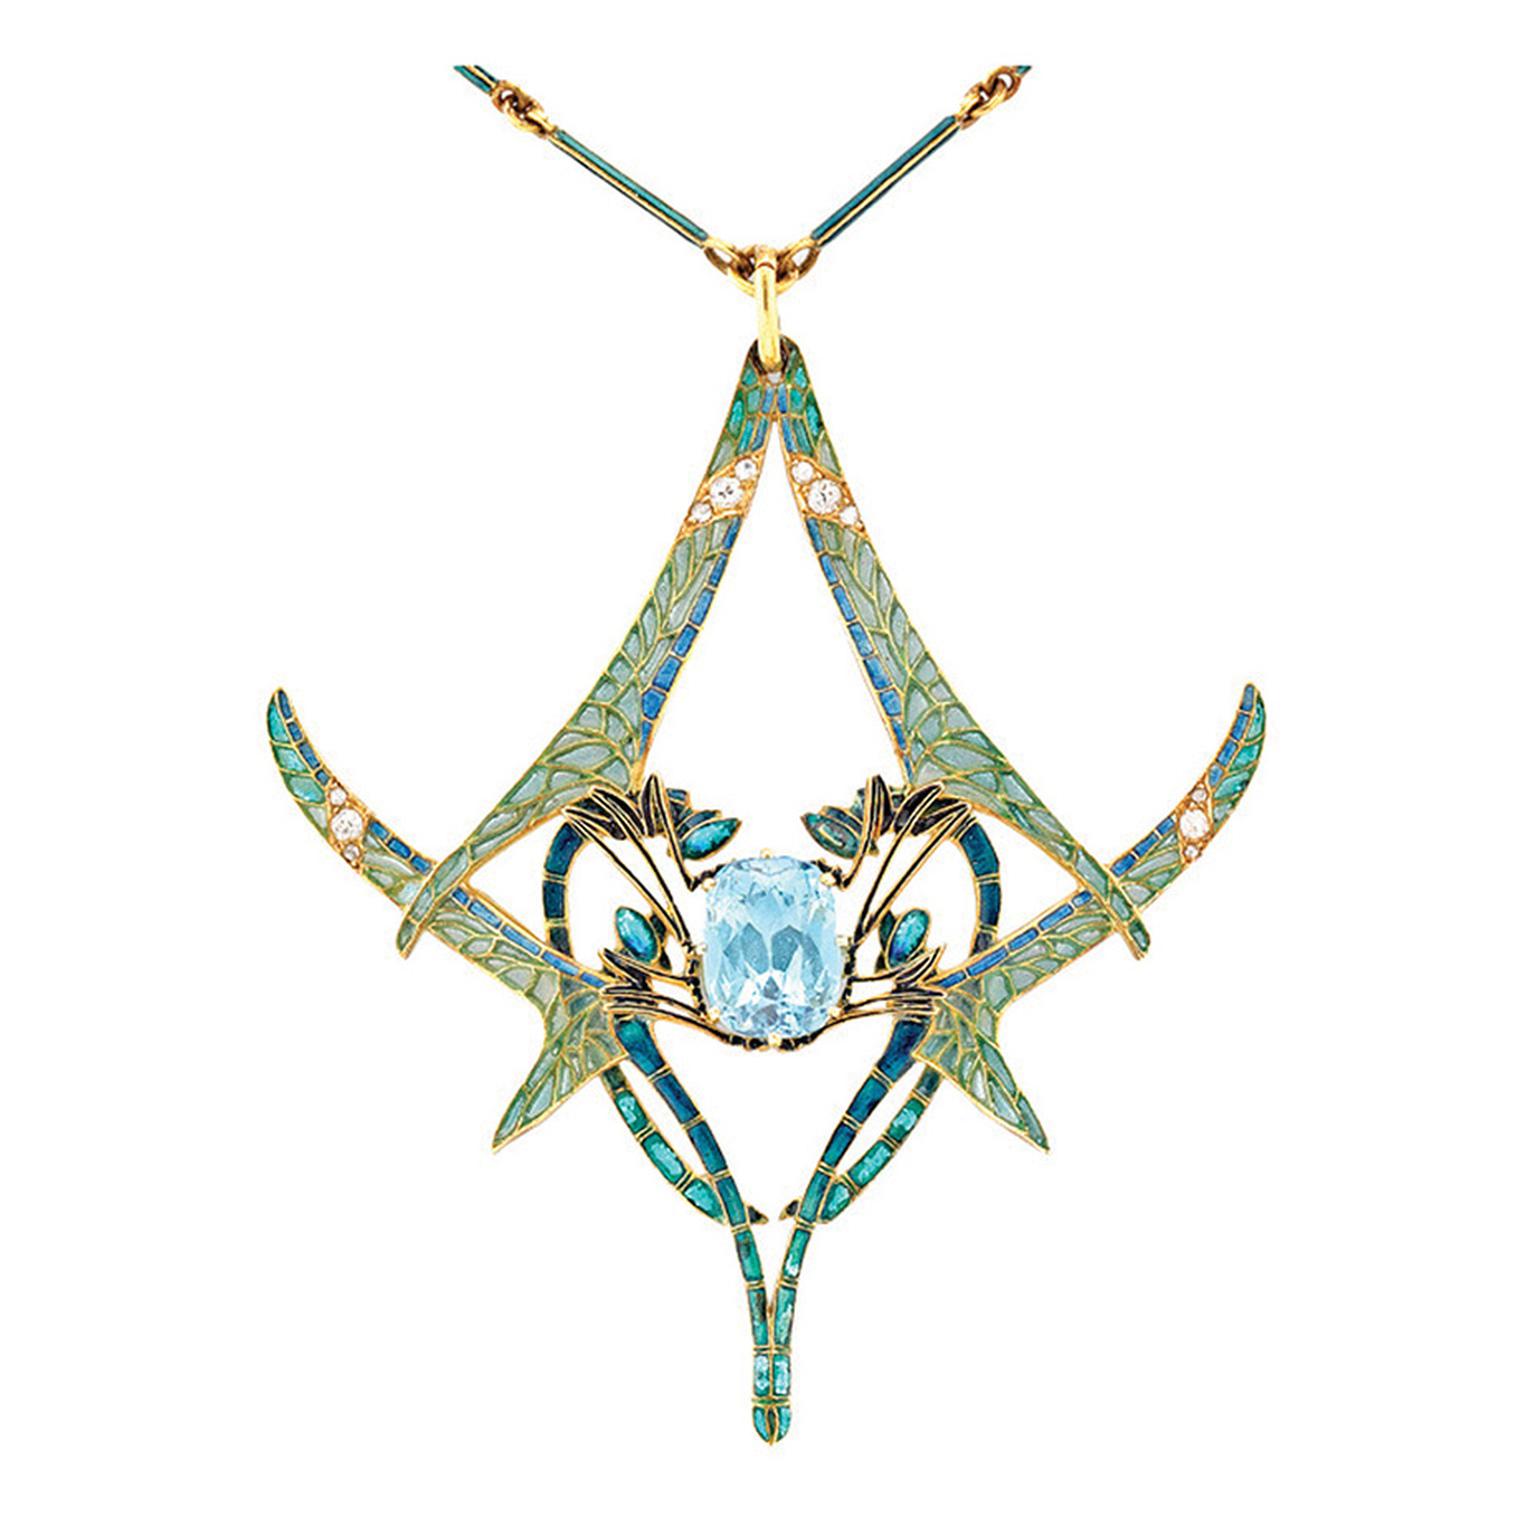 Louis Vuitton High Jewelry Necklace - 5 For Sale on 1stDibs